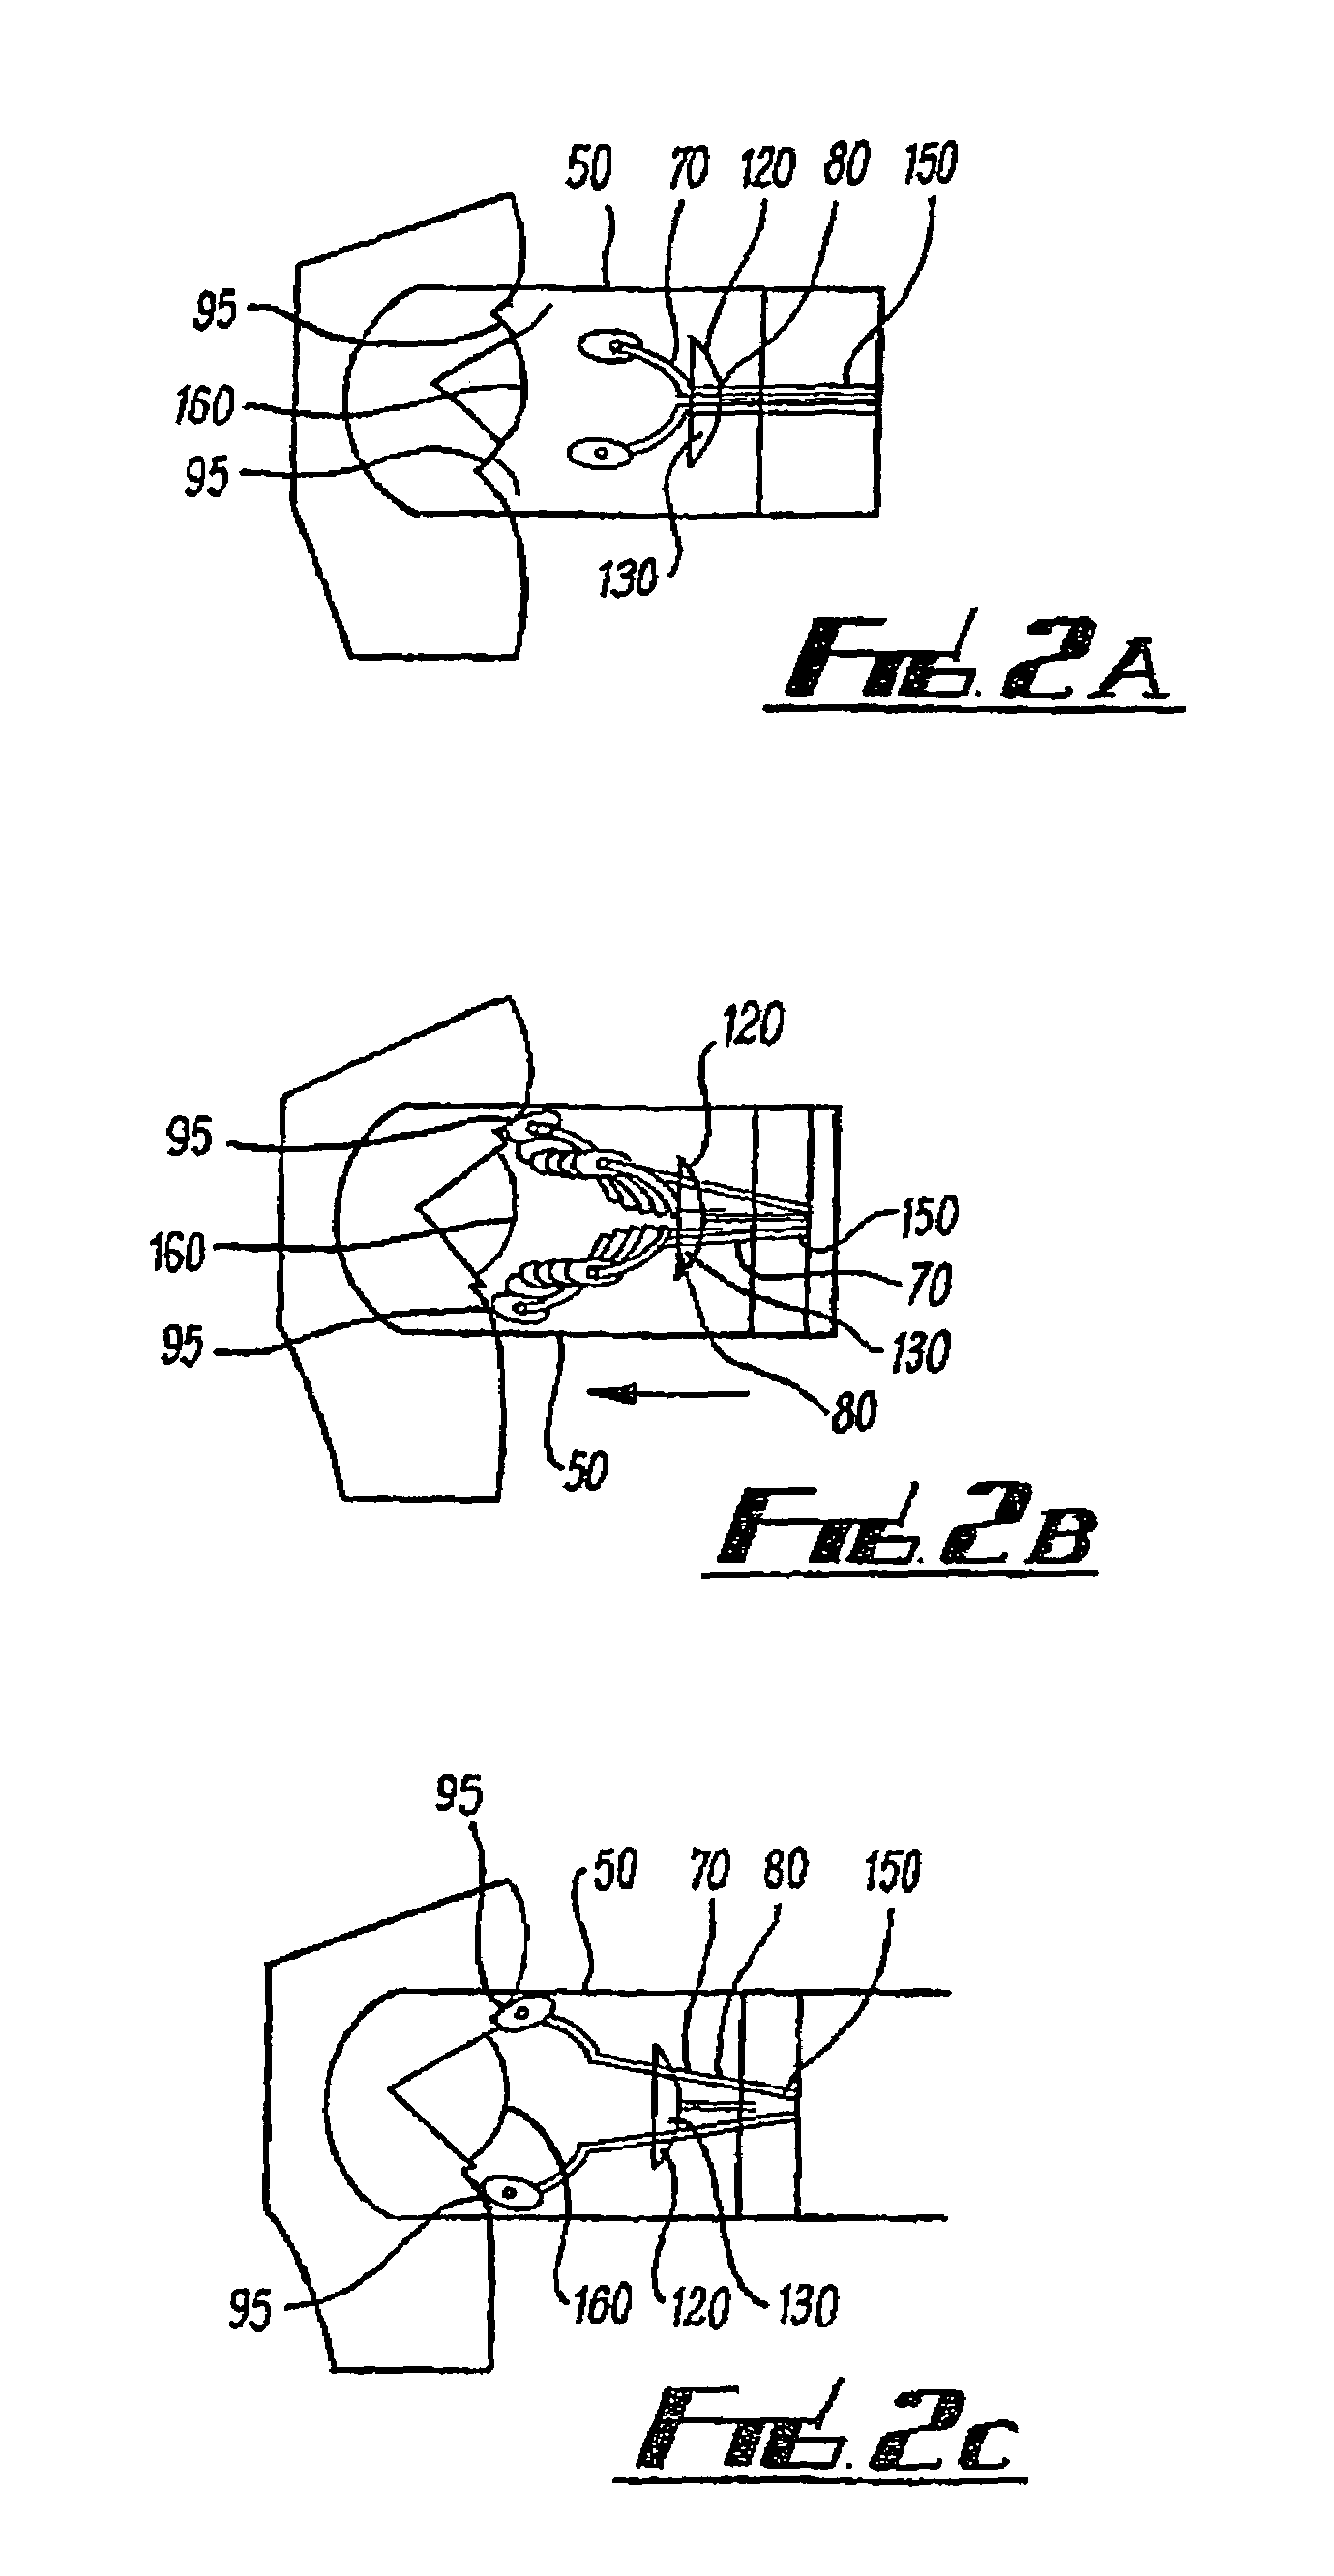 Contact lens manipulation and cleaning apparatus